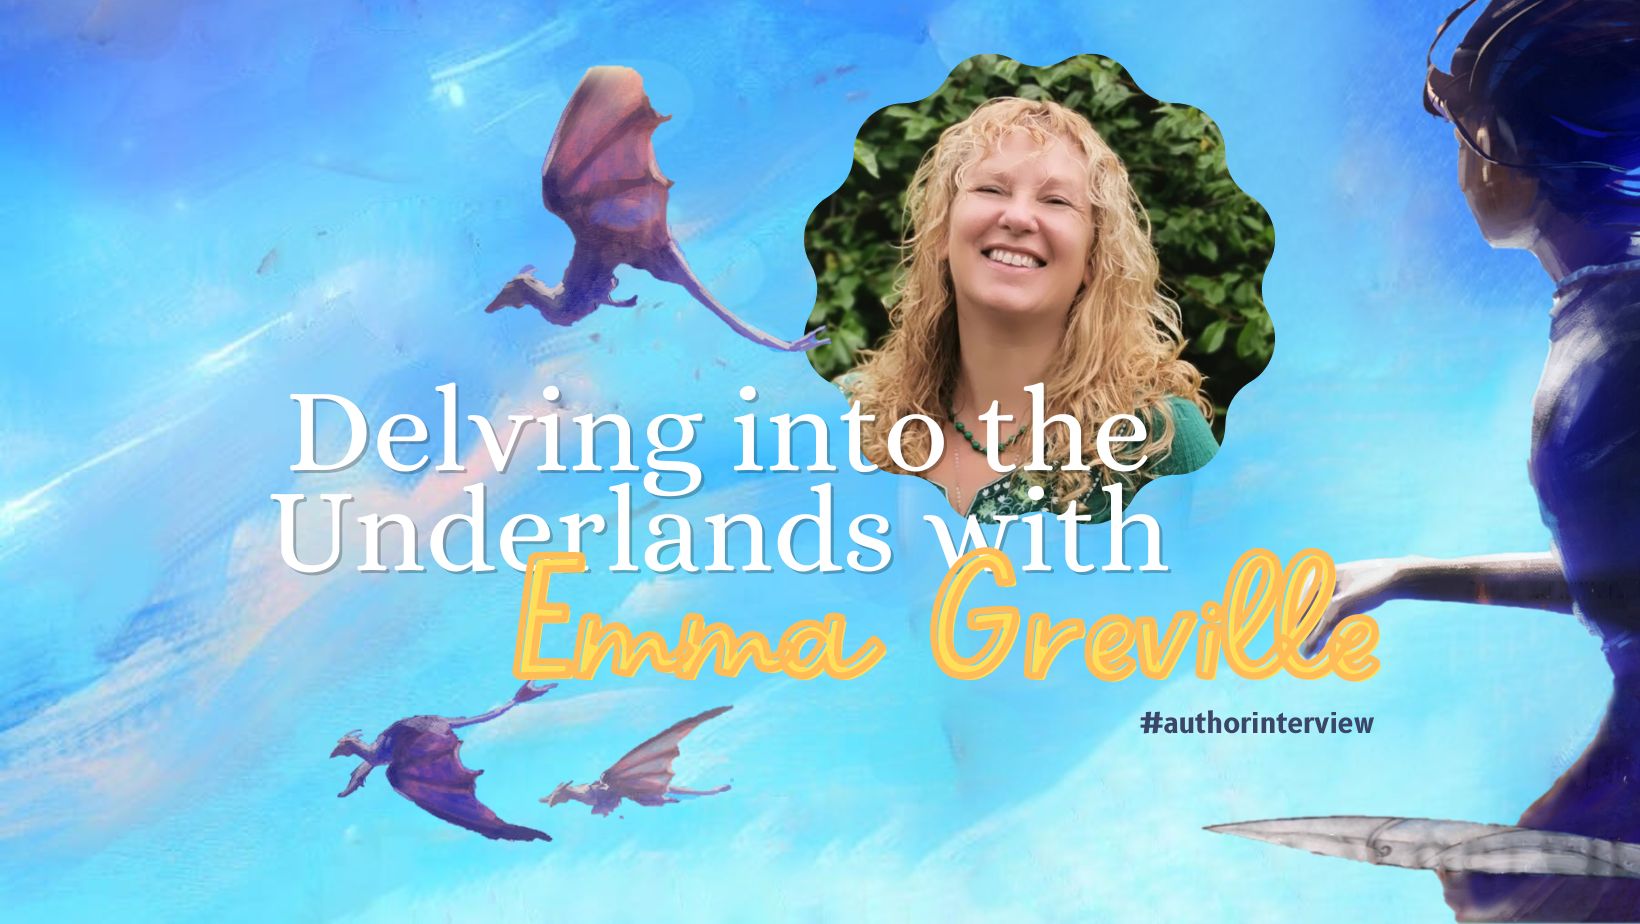 Delving into the Underlands with Emma Greville